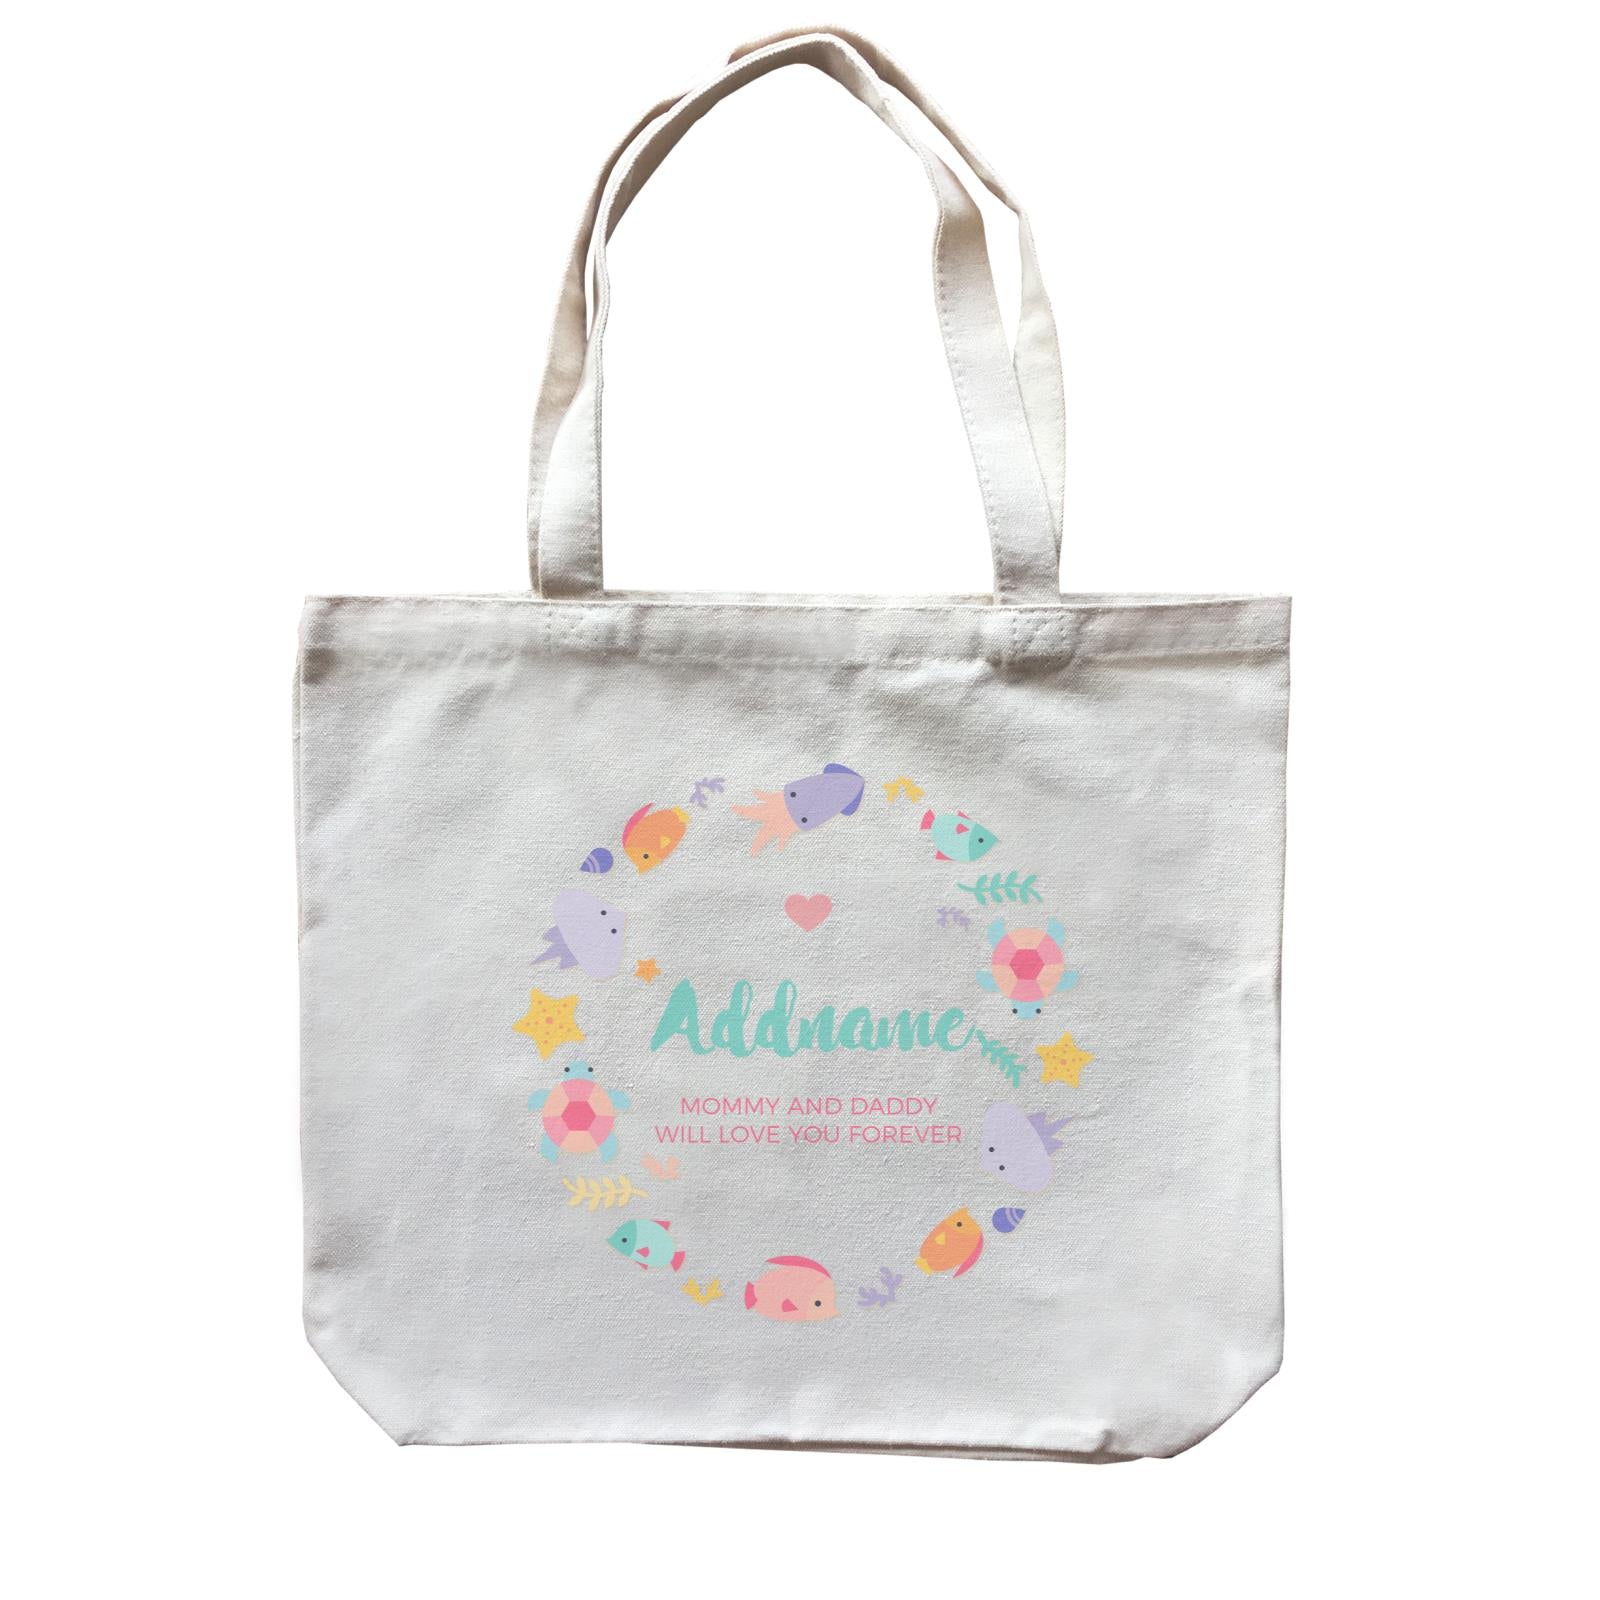 Cute Sea Creatures with Elements Personalizable with Name and Text Canvas Bag